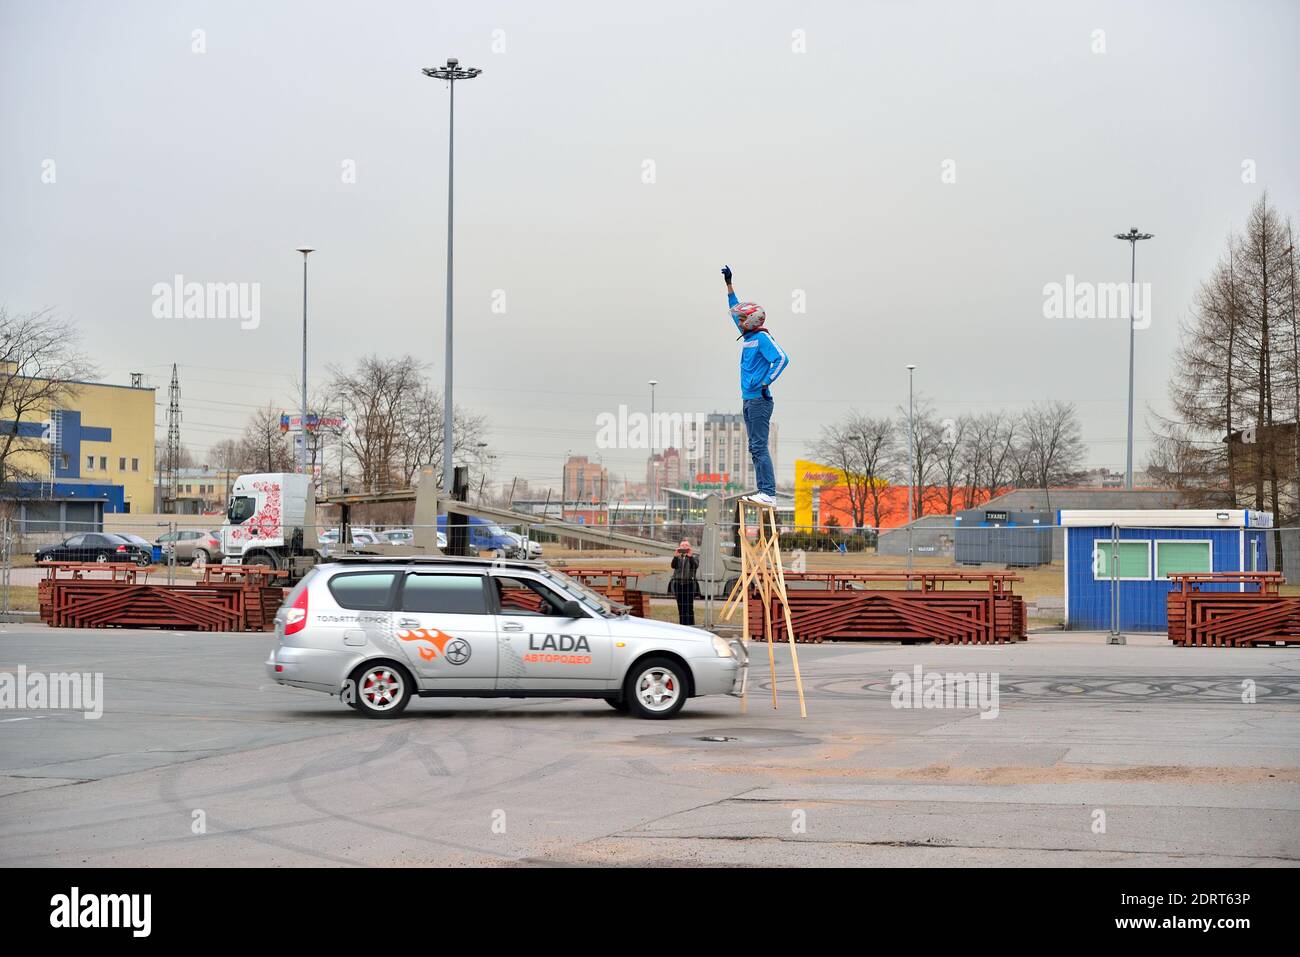 ST.PETERSBURG, RUSSIA - APRIL 07, 2017: Car Lada Priora knocks pedestal stunt during the show, Lada-truck Rodeo thing in St. Petersburg Stock Photo